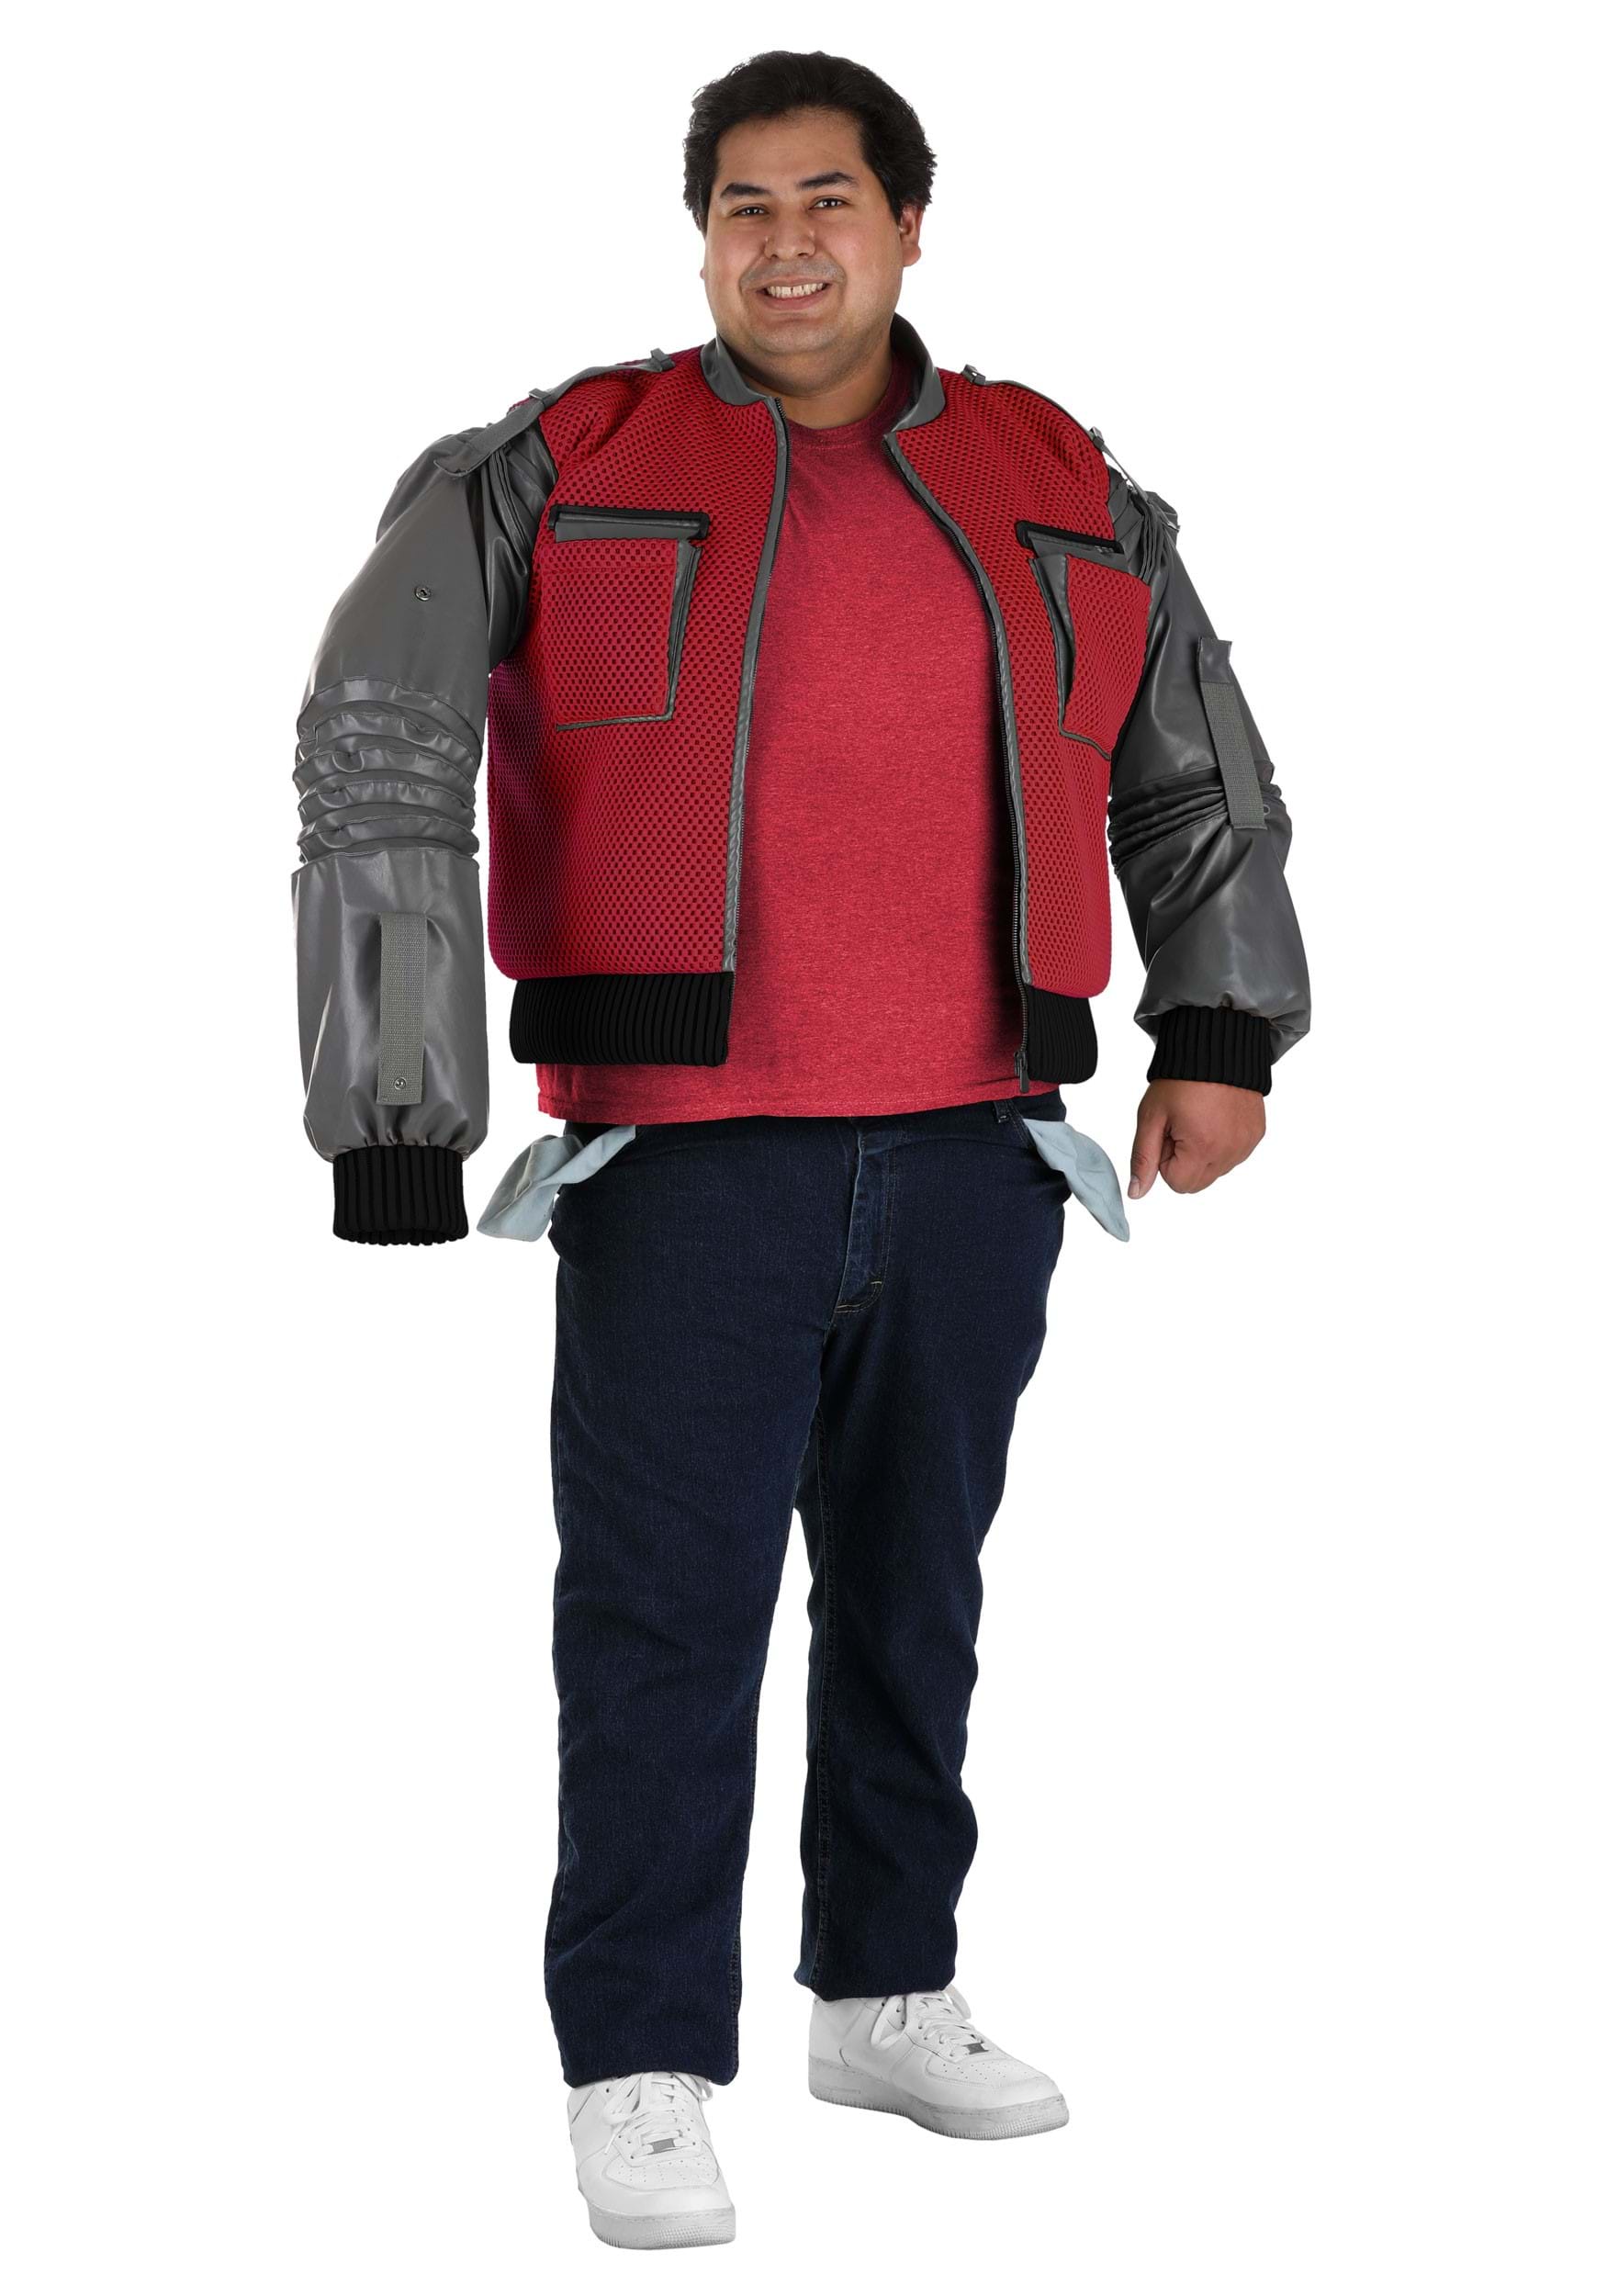 Plus Size Men's Authentic Marty McFly Jacket Fancy Dress Costume From Back To The Future